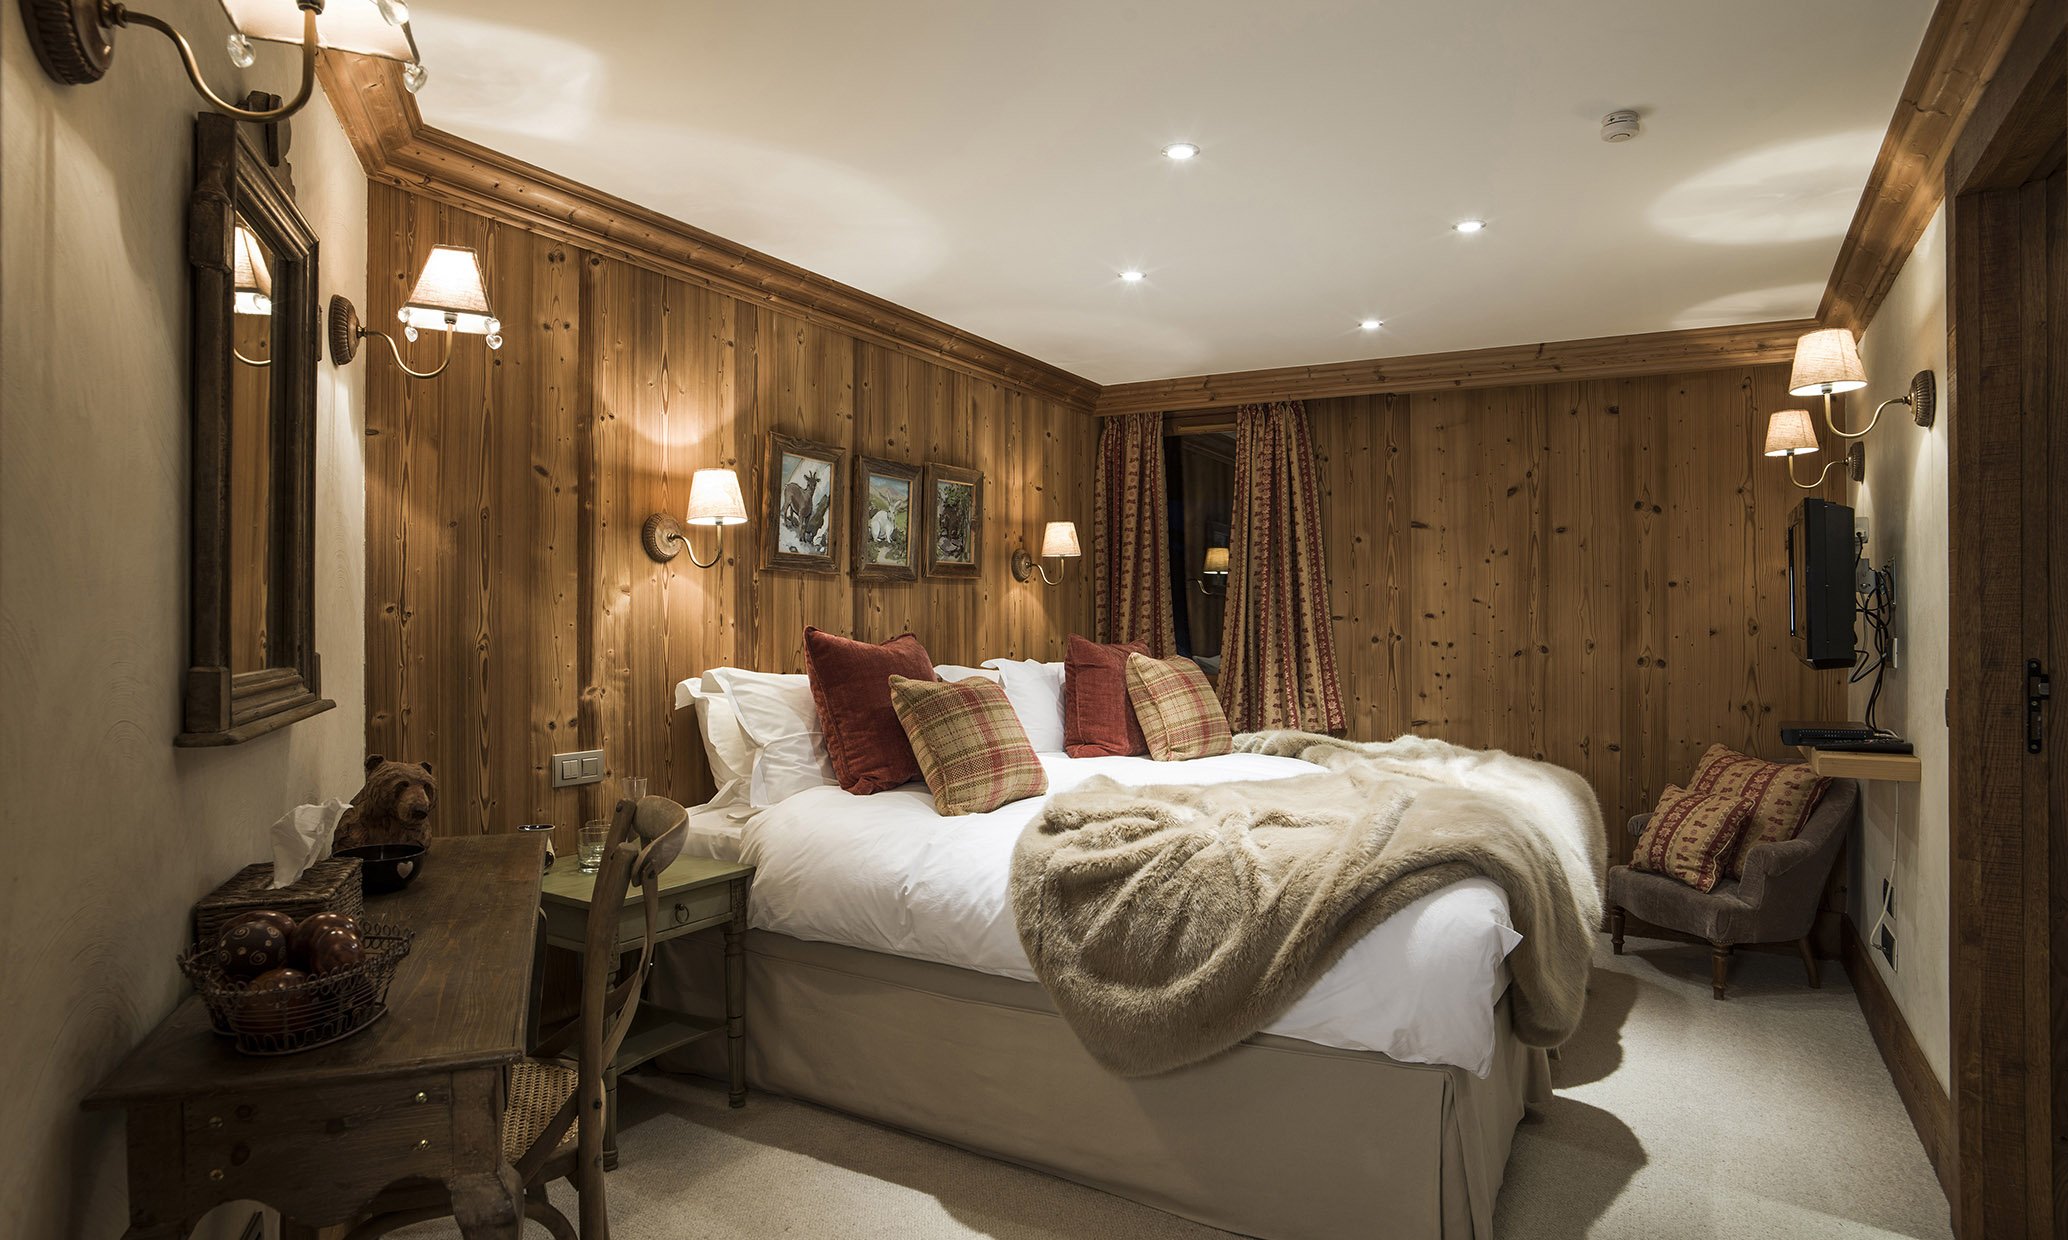 One of the Bedrooms in Chalet Lapin Blanc, Meribel